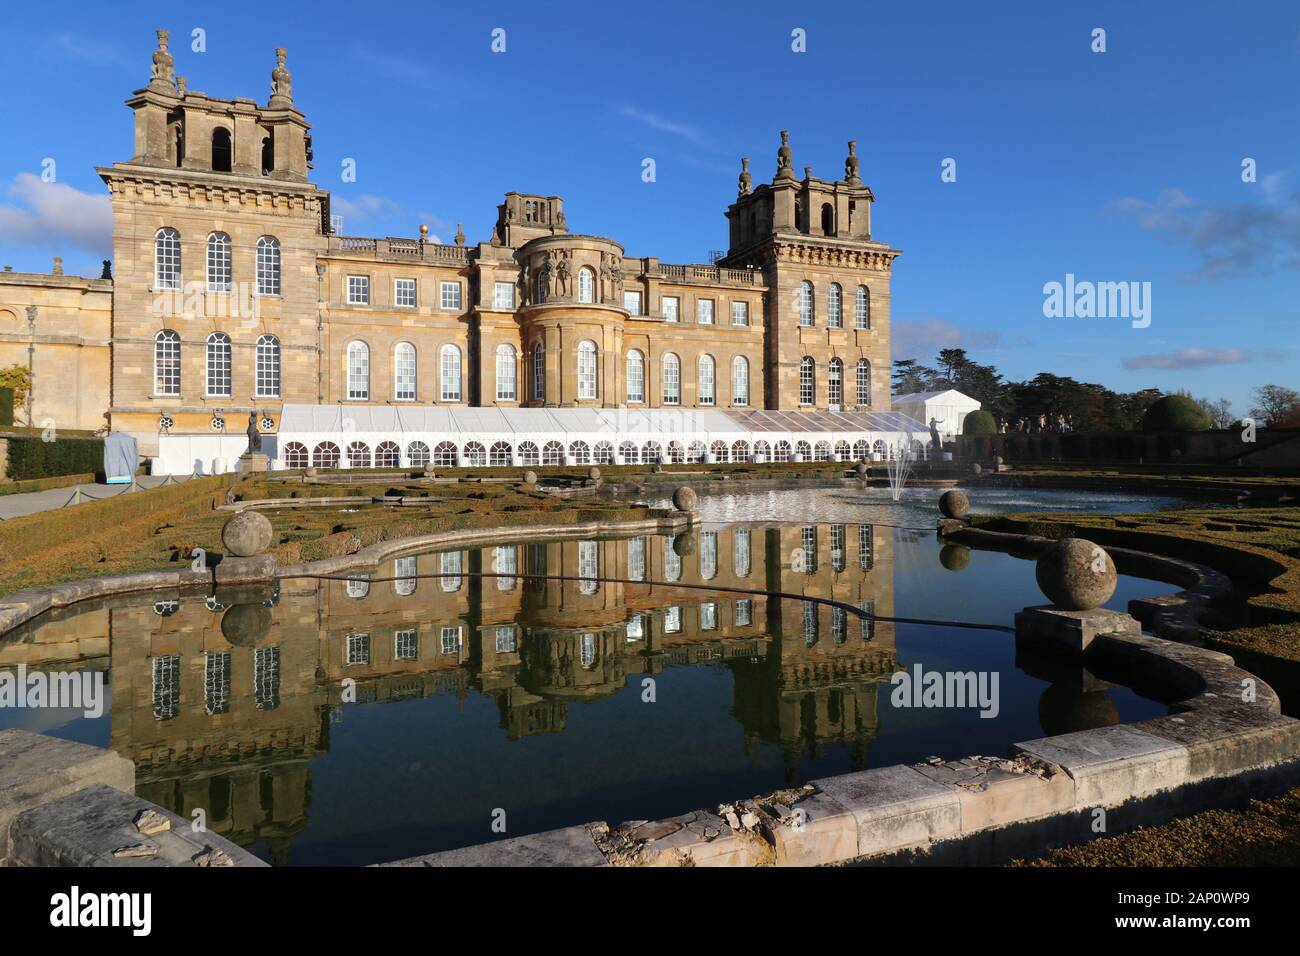 Woodstock and Blenheim Palace in Oxfordshire, England Stock Photo